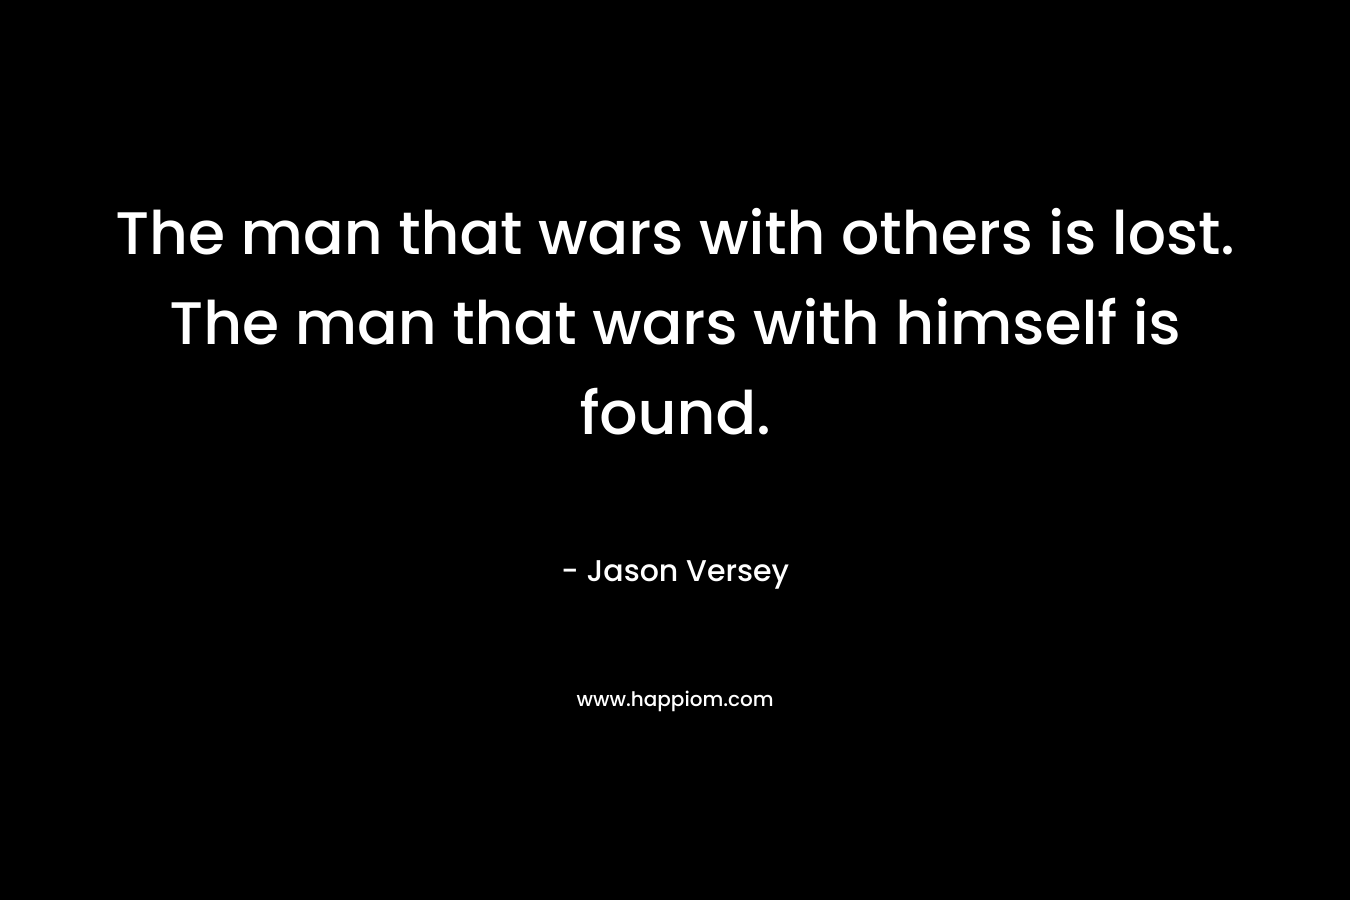 The man that wars with others is lost. The man that wars with himself is found.